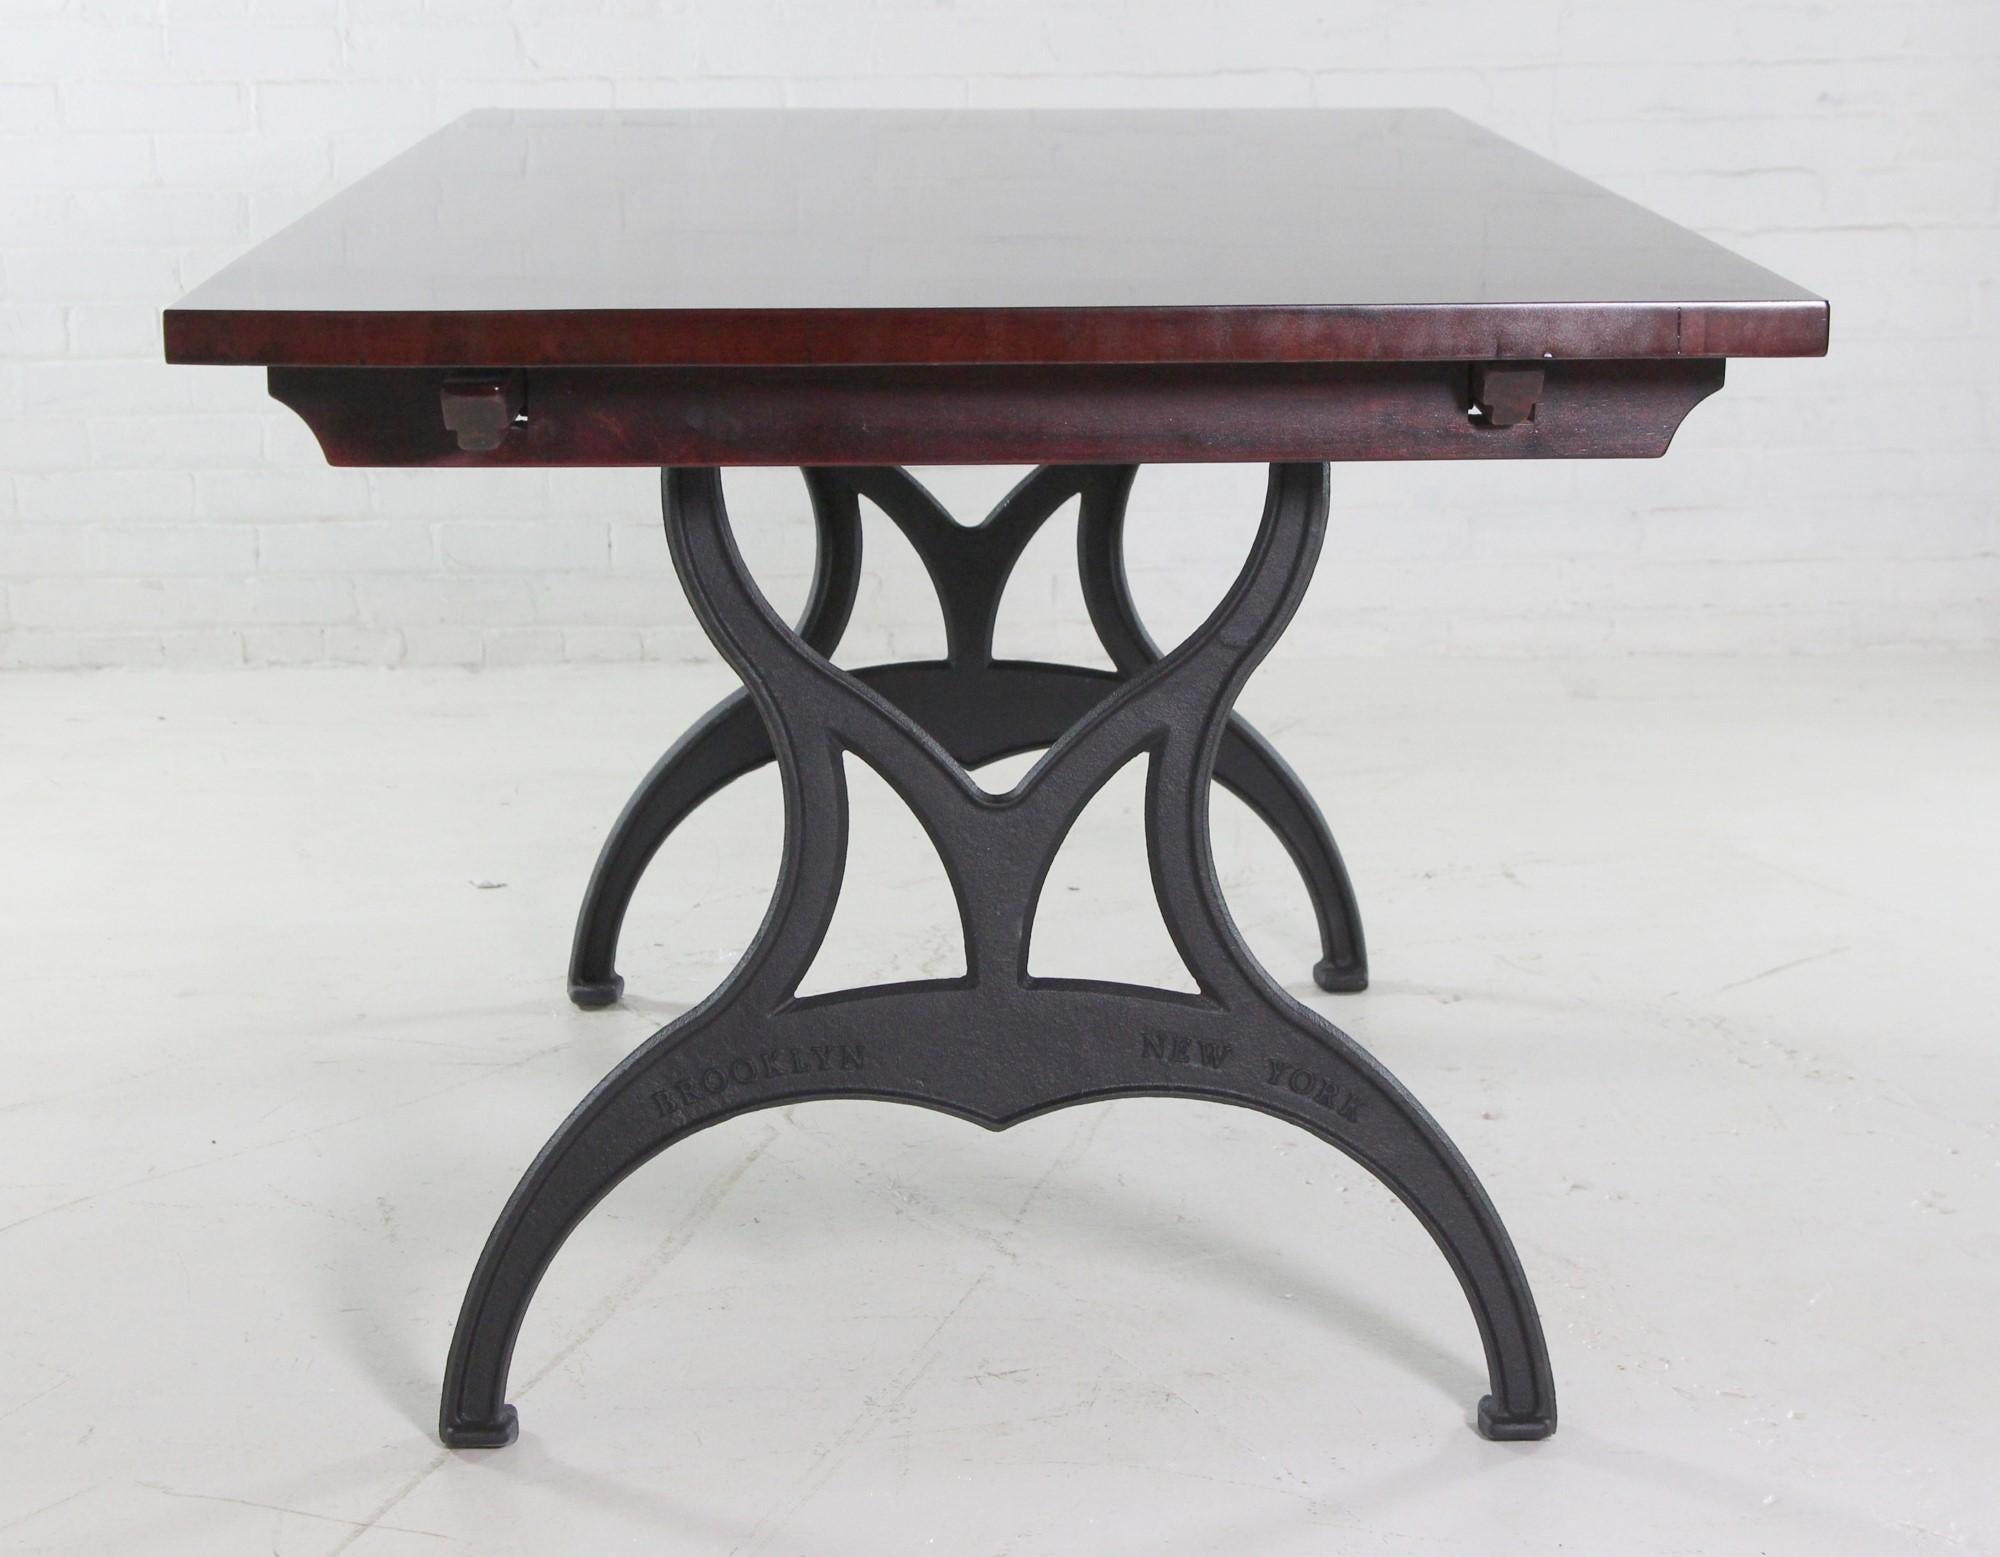 Red Mahogany Apitong Table w Extensions Cast Iron Legs Brooklyn, NY For Sale 4